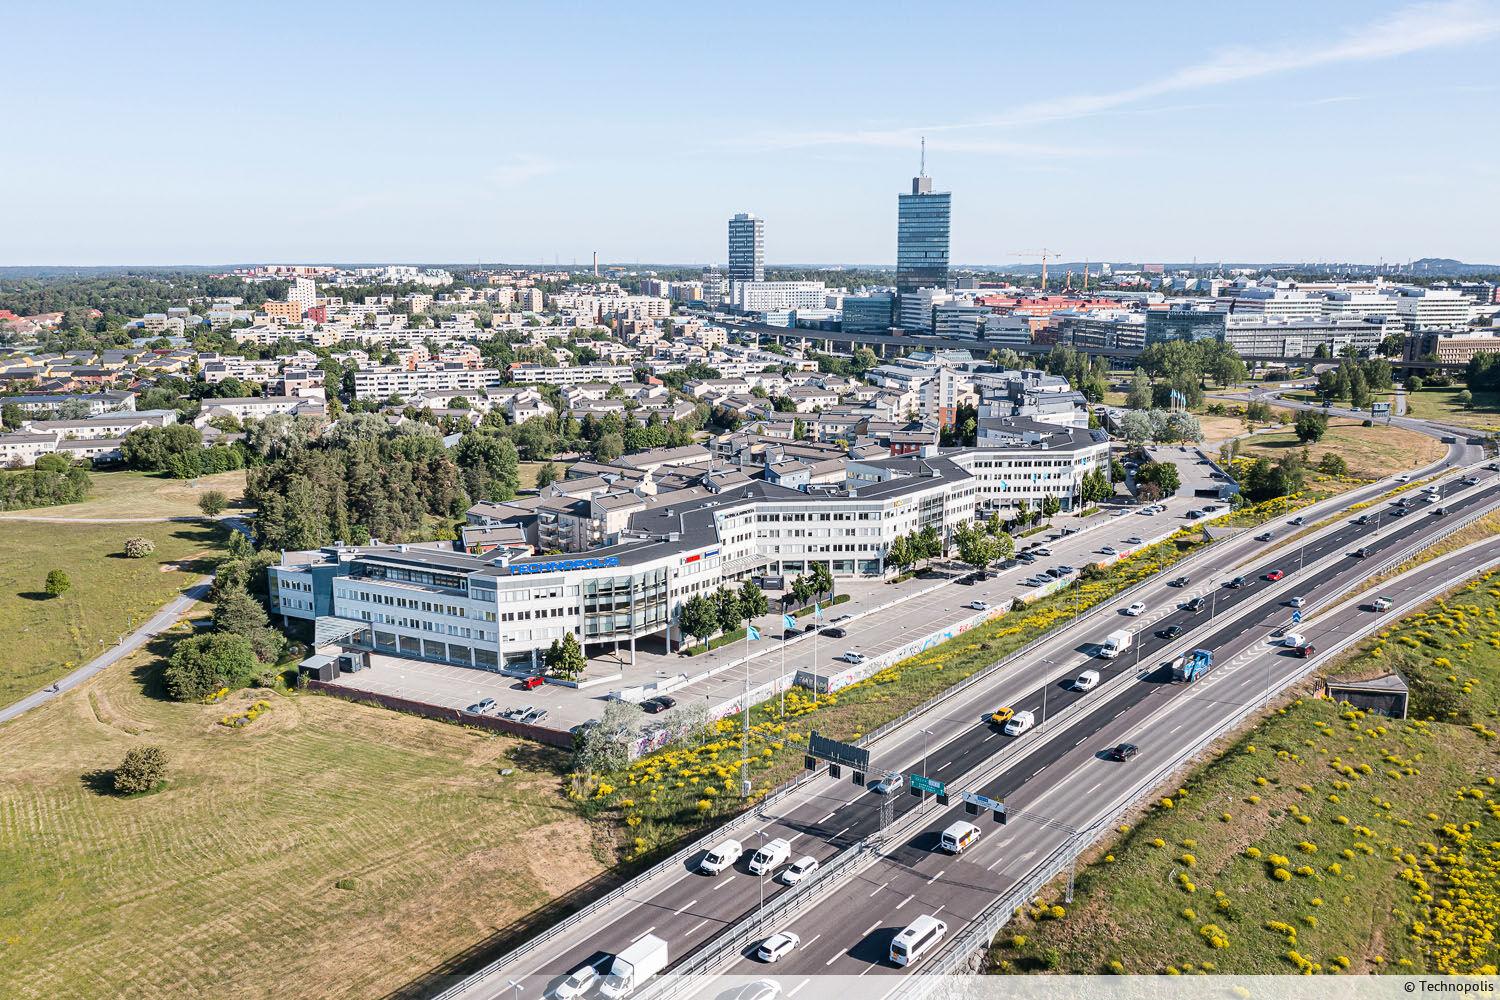 A third floor office space available for rent from the Technopolis Kista 2 building. This large office space includes office and meeting rooms, open space, kitchen and toilet facilities.